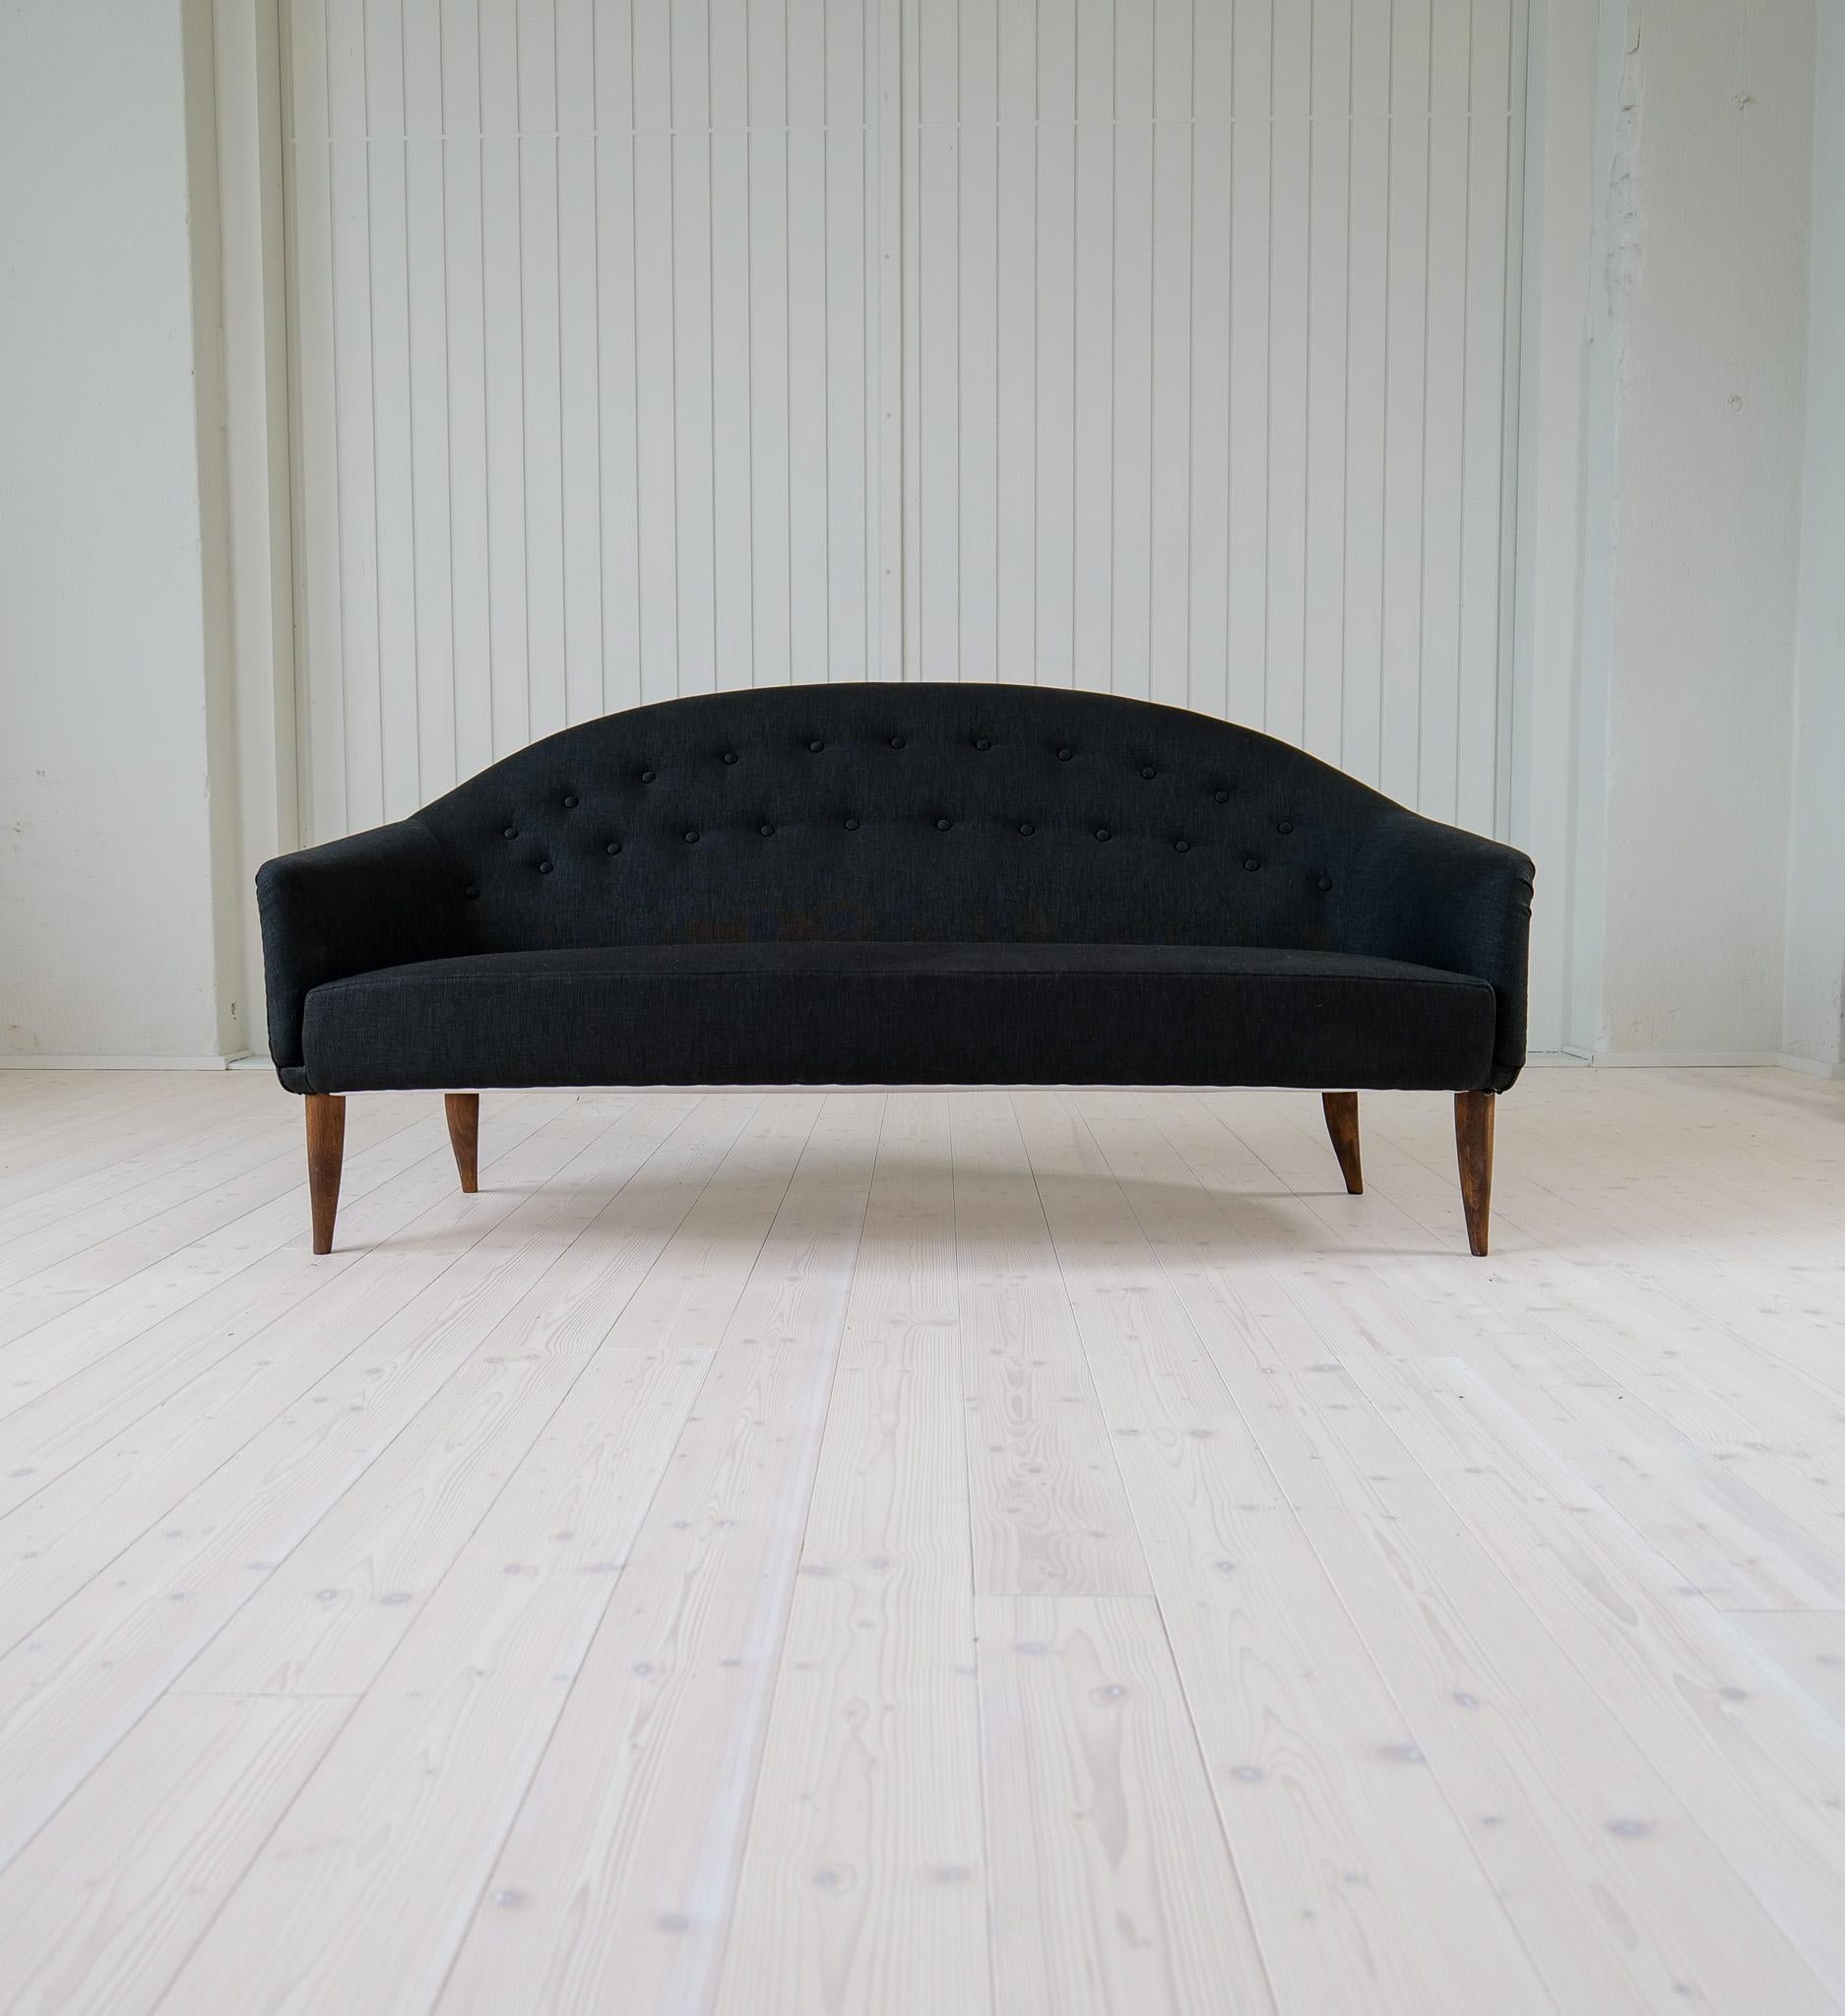 This three-seat sofa with elegant and sensual forms was named “Paradis” and was a series designed by Kerstin Hörlin-Holmquist for NK (Nordiska Kompaniet). Reupholstered with Swedish quality fabric and the birch legs are stained with a cognac-colored